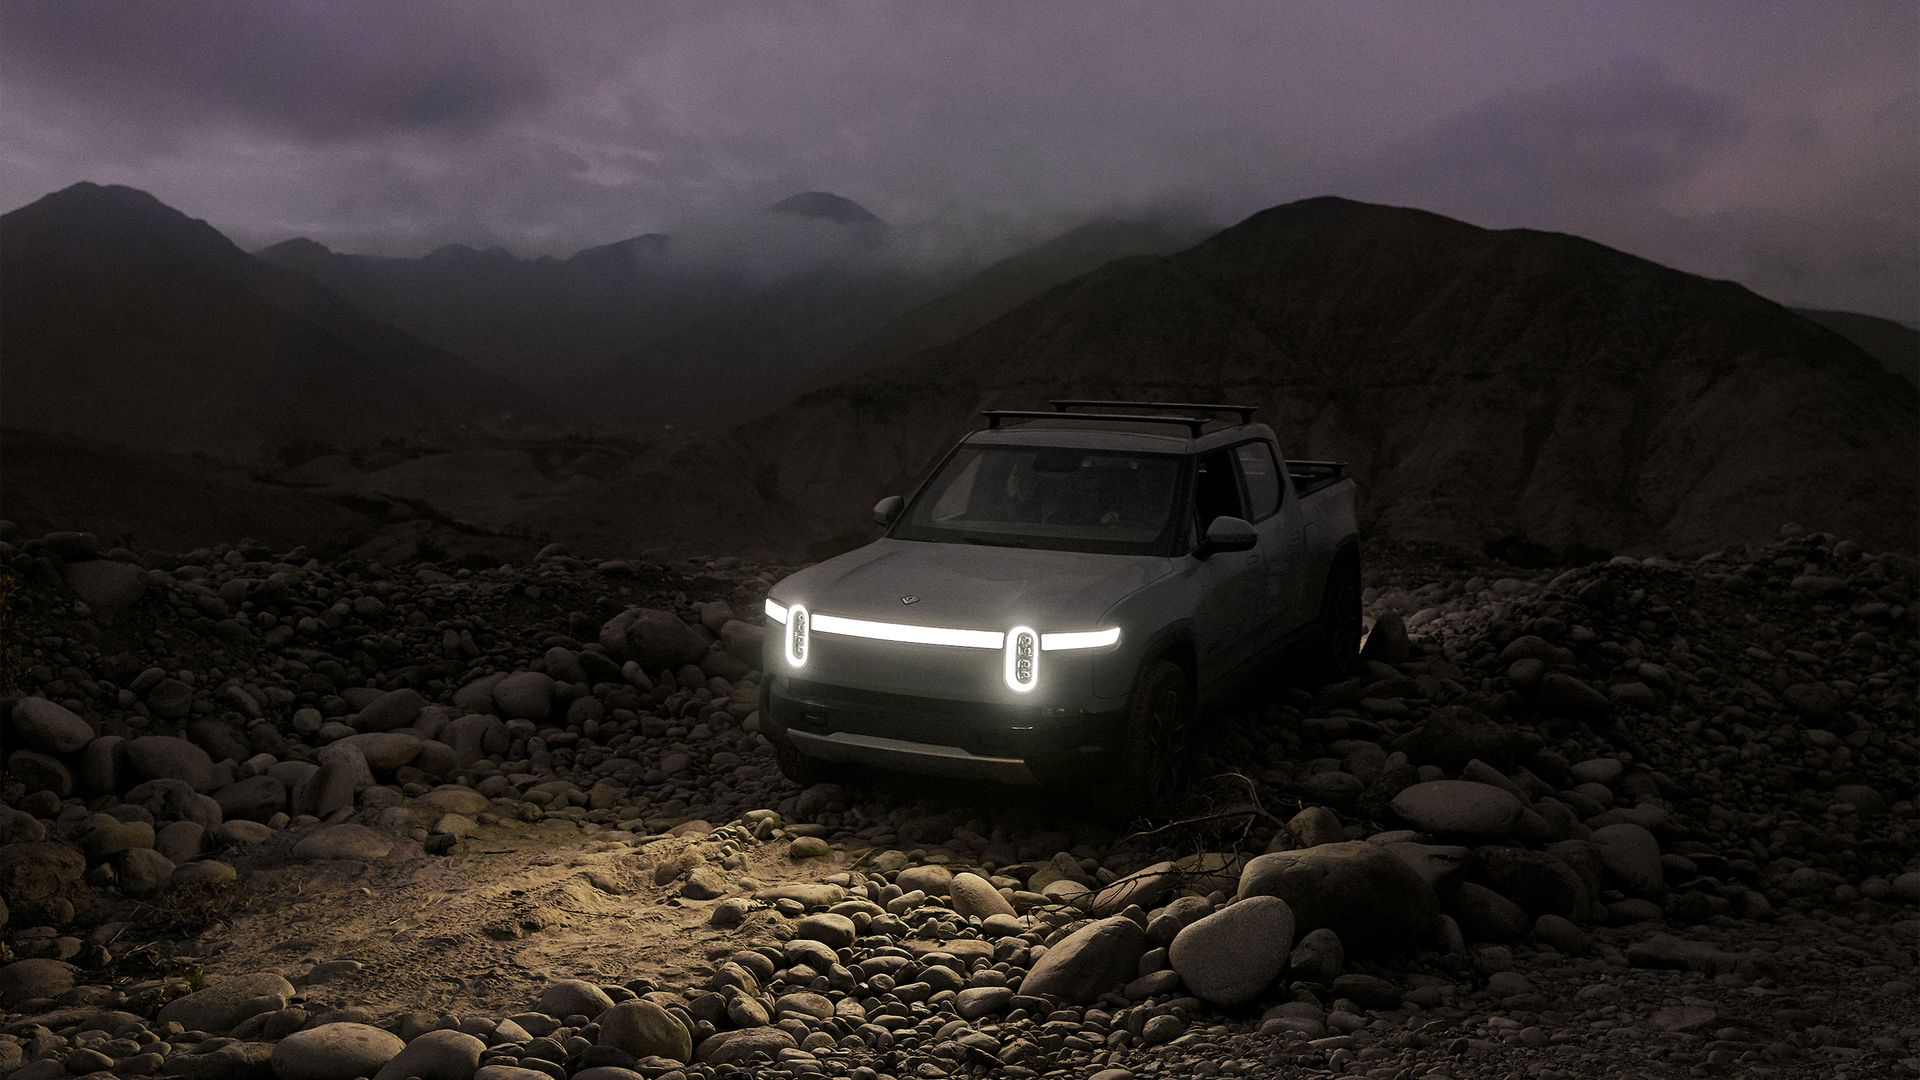 Rivian R1T electric trucks are arriving with customers, but the pace